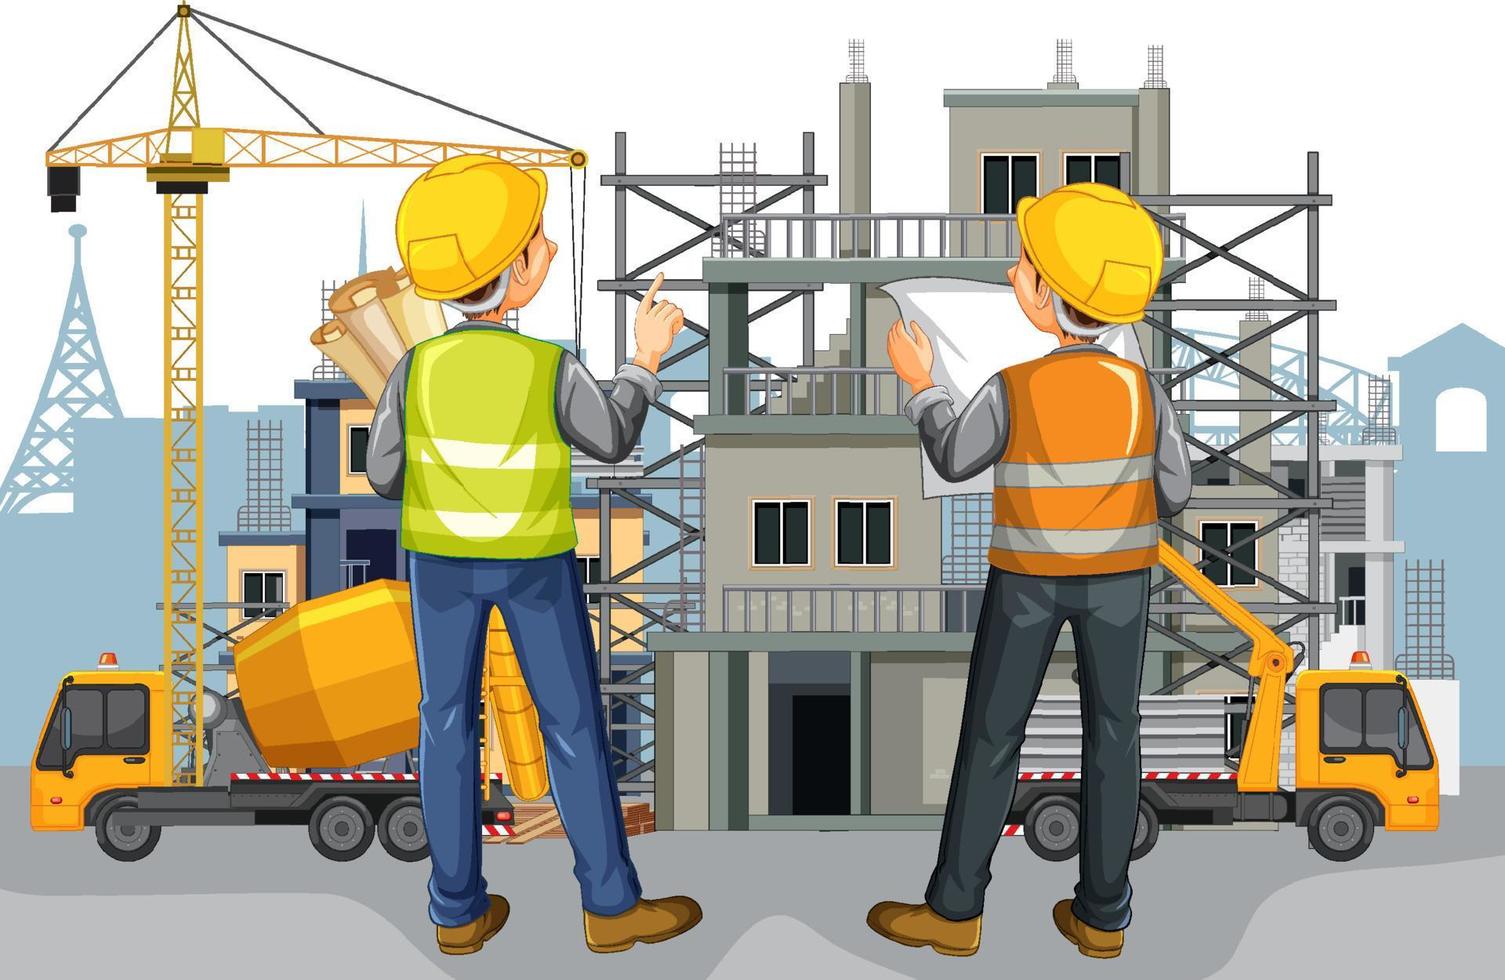 House construction site with workers vector